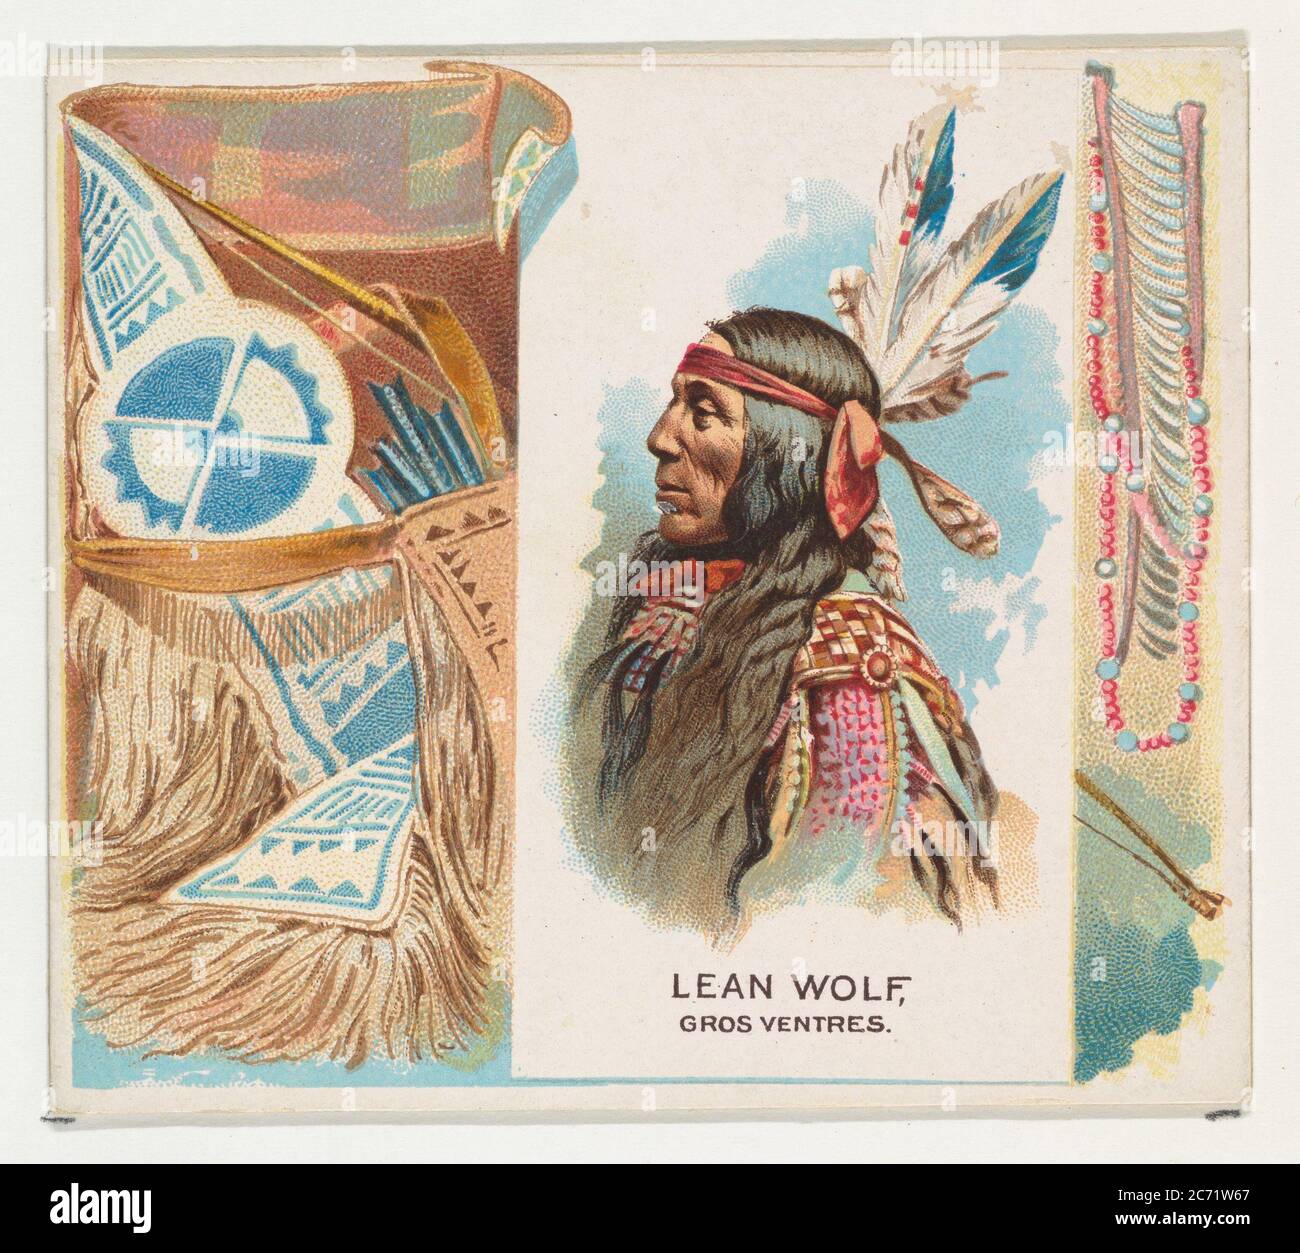 Lean Wolf, Gros Ventres, from the American Indian Chiefs series (N36) for Allen &amp; Ginter Cigarettes, 1888. Stock Photo